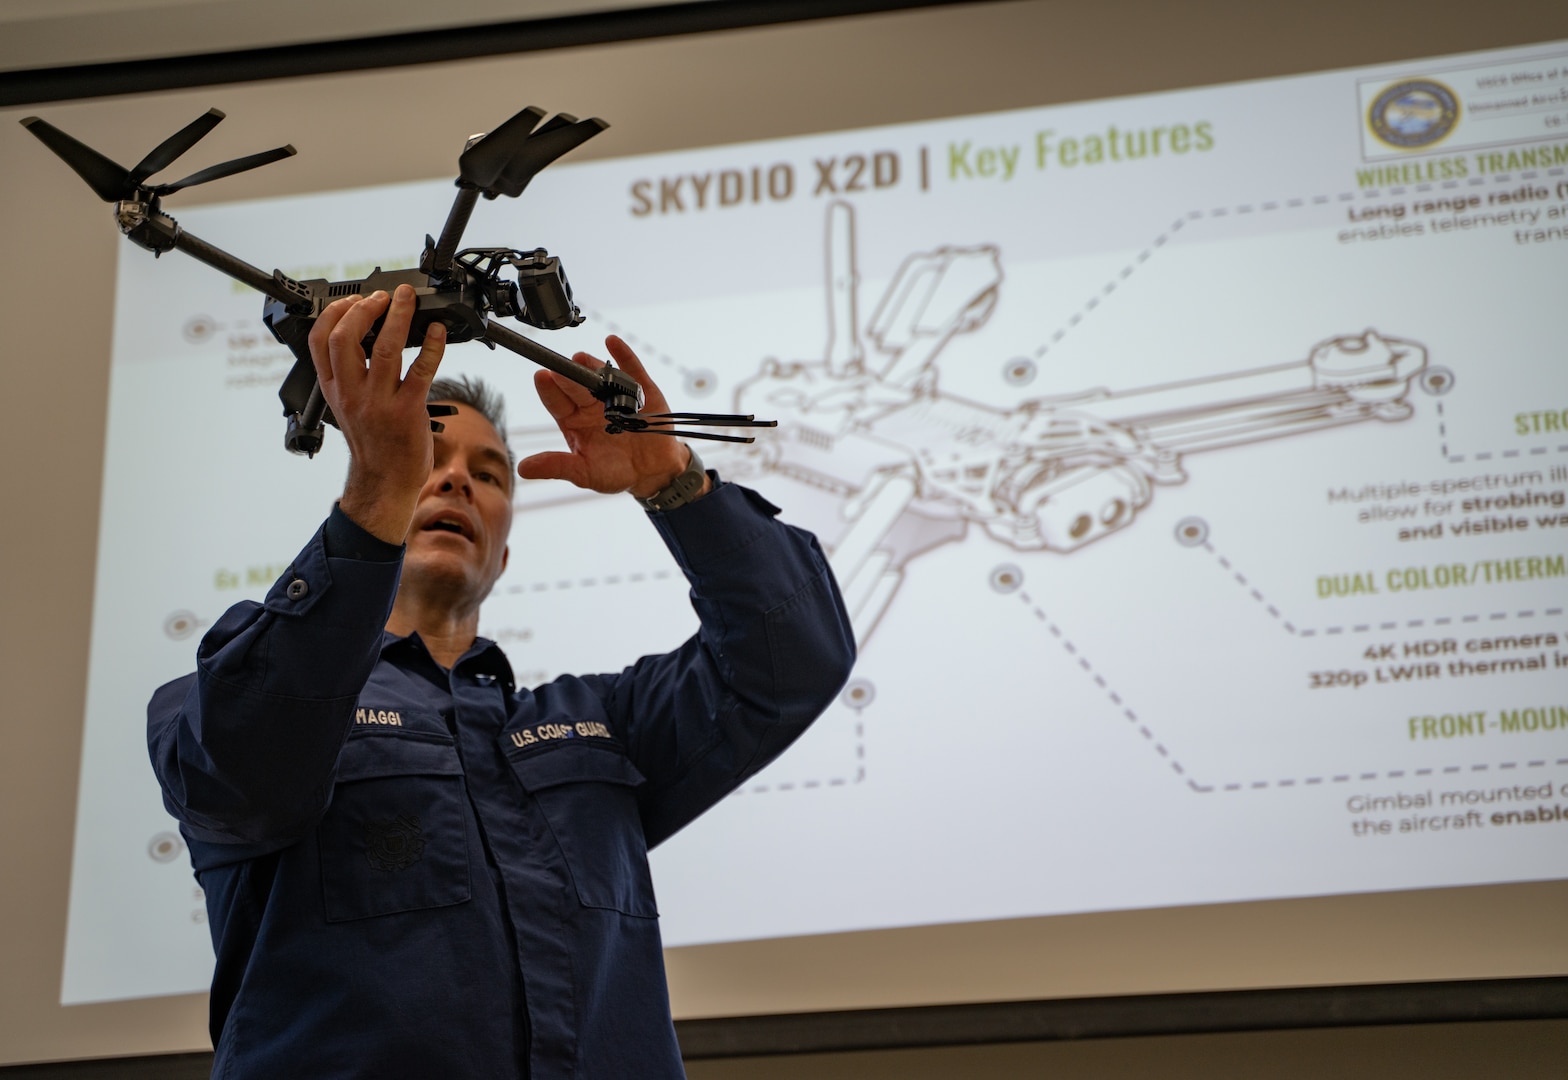 Capt. Brian Maggi, Head of Civil Engineering at the Coast Guard Academy, holds up a drone during a training course at the Coast Guard Academy, New London, Conn, Feb 21, 2023. The Coast Guard Short Ranged Unmanned Aerial Systems (SR-UAS) program is designed to create designated pilots and integrate drone capabilities into various missions. (U.S. Coast Guard photograph by Petty Officer 3rd Class Matt Thieme)